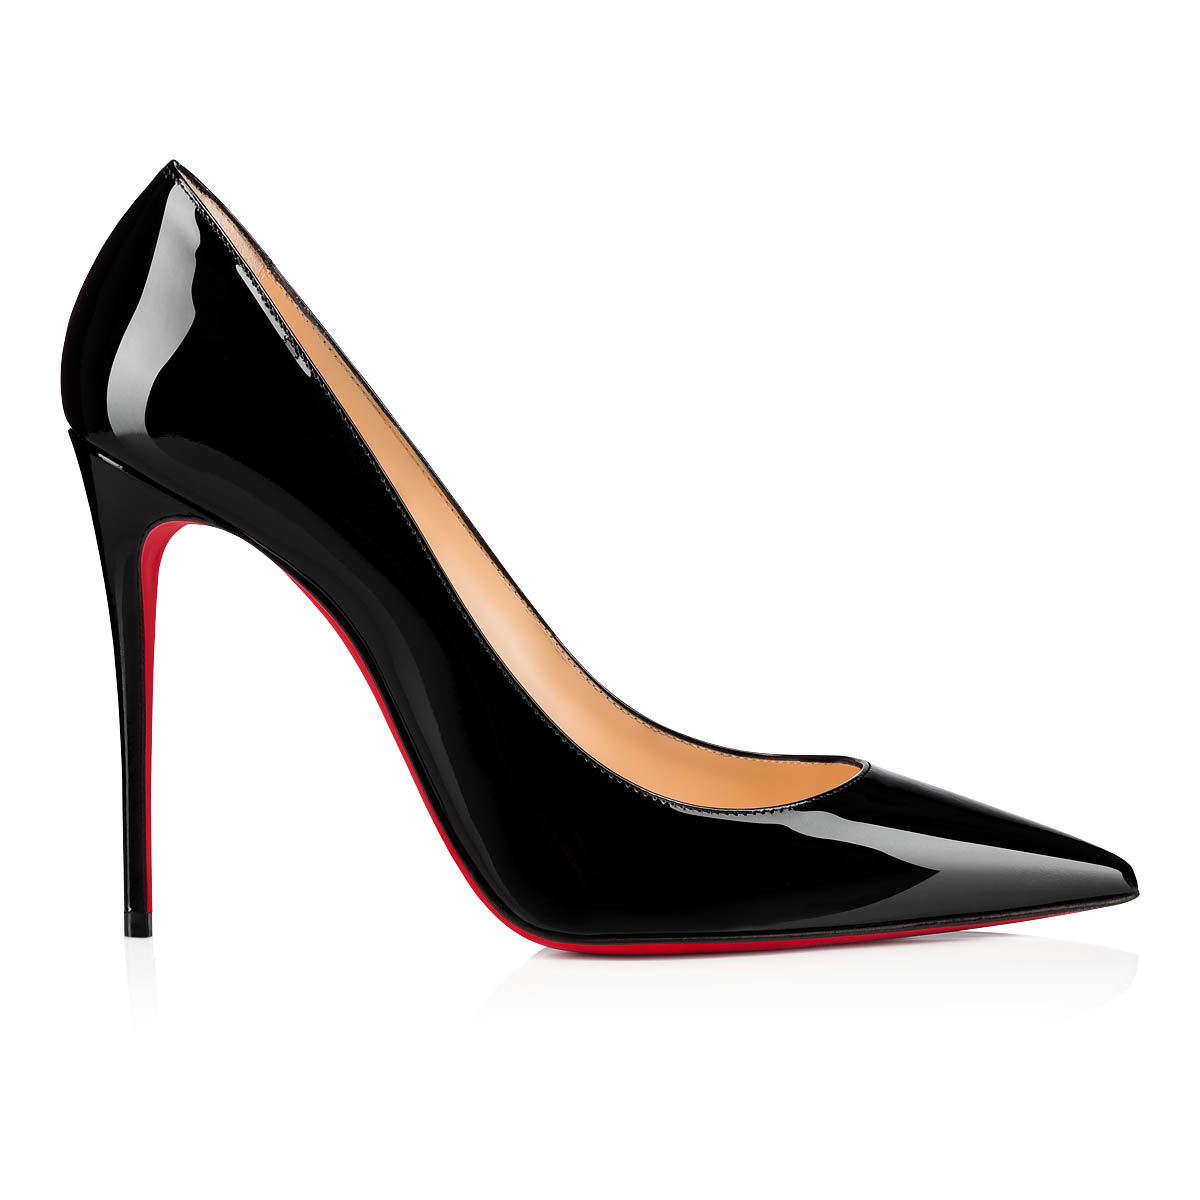 Kate - 100 mm Pumps - Patent calf leather - Black - Christian